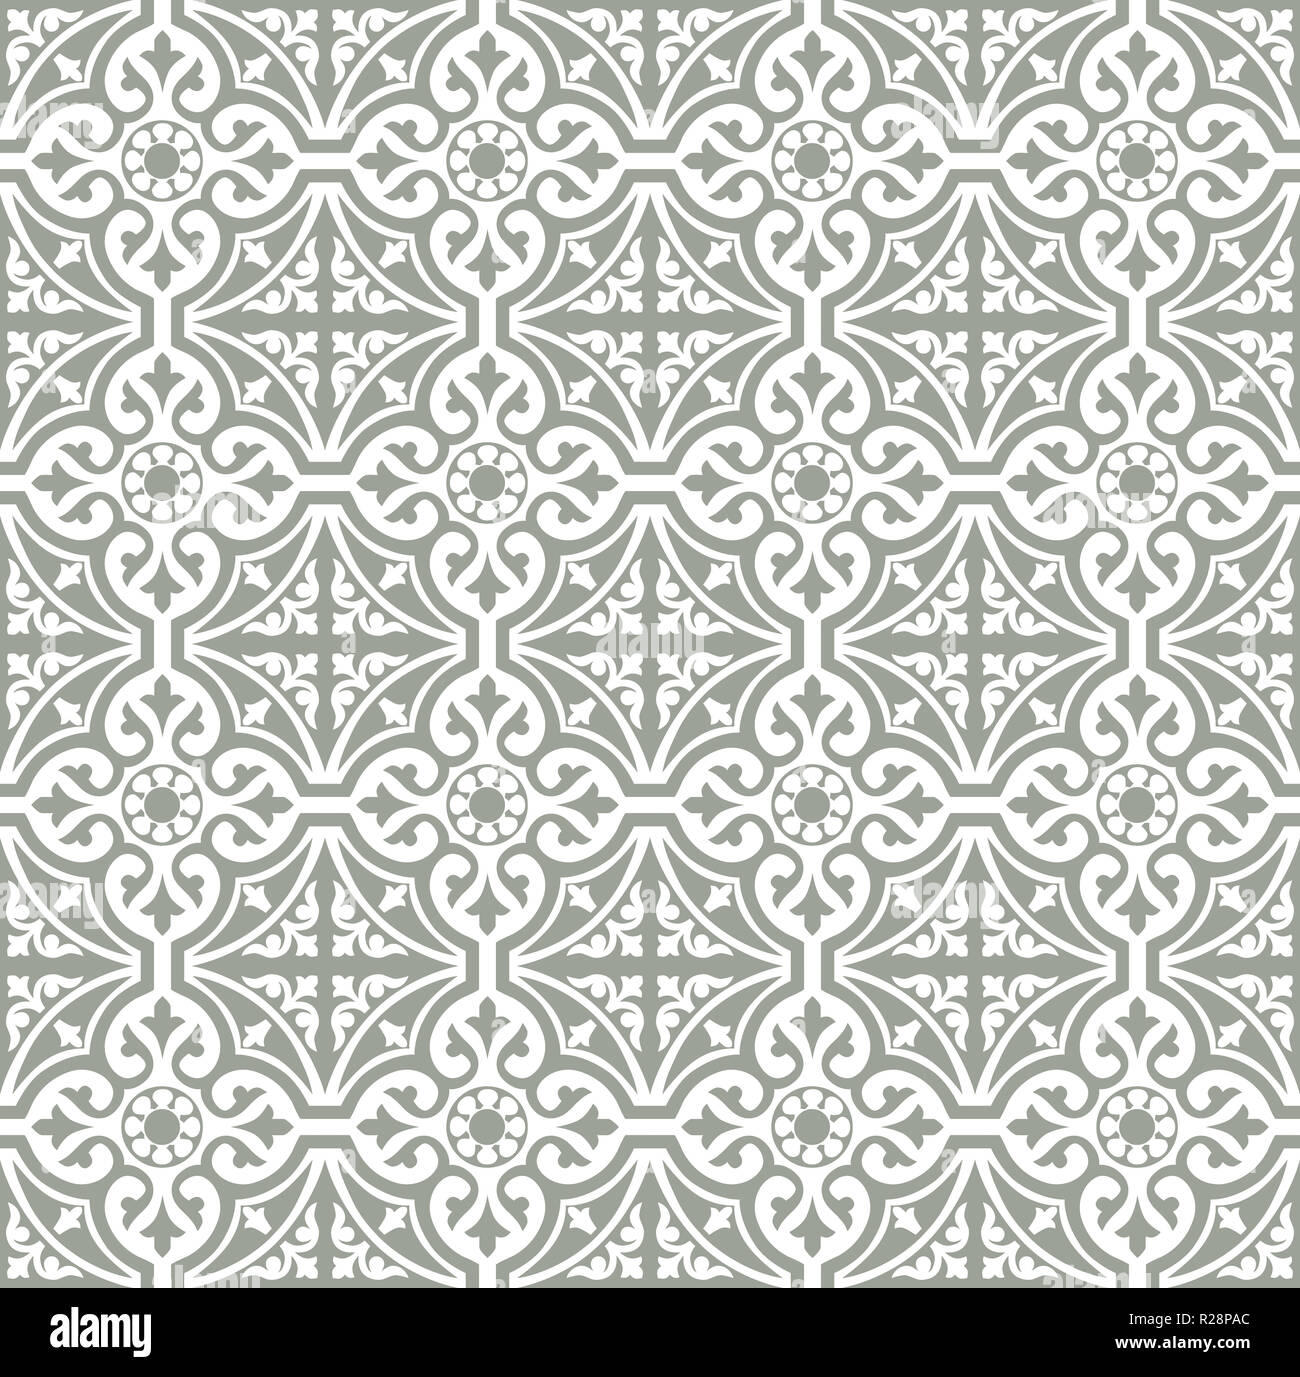 Tiles Floral portuguese style pattern, usually used in tiles in Spain, Portugal and other Mediterranean countries Stock Photo